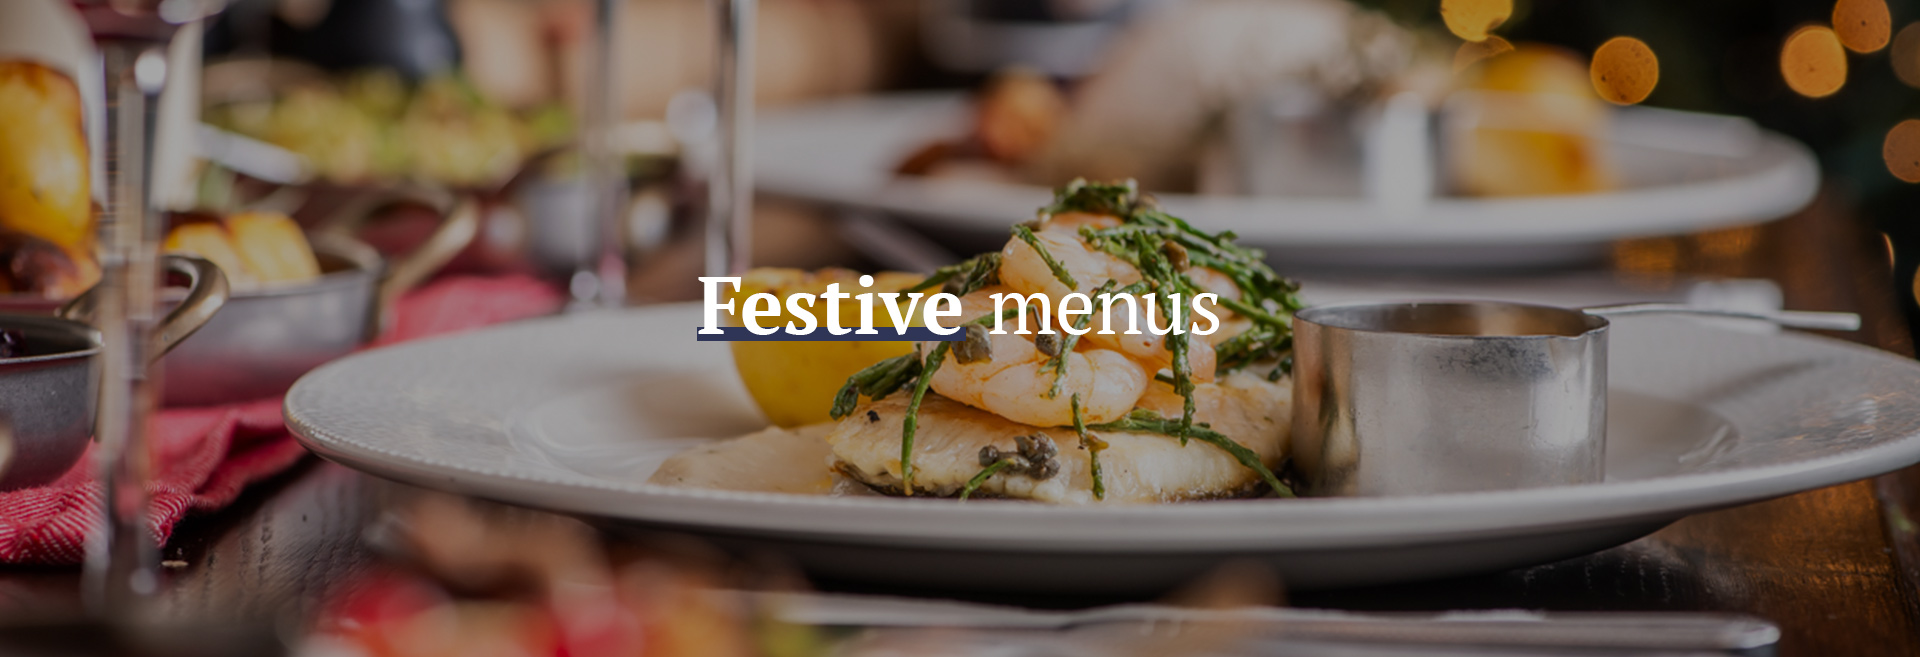 Festive Christmas Menu at The Drapers Arms 